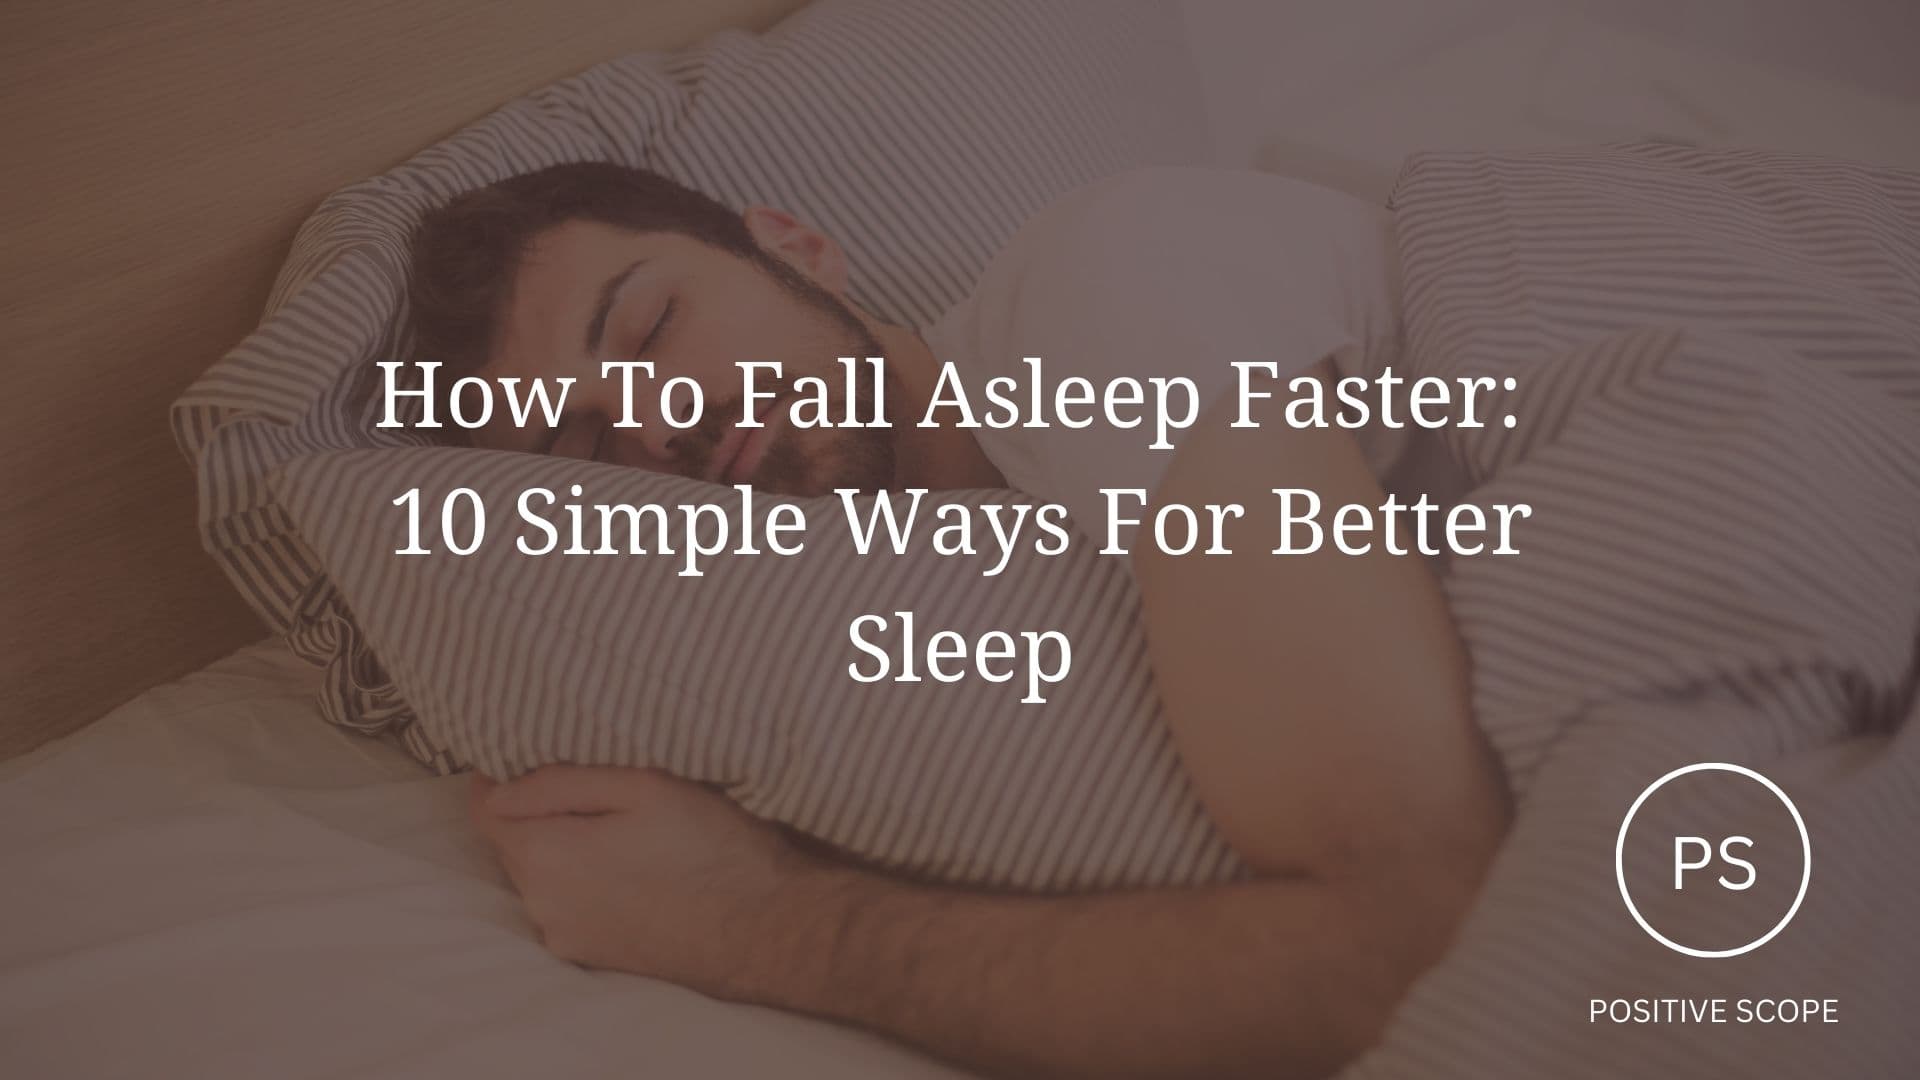 How To Fall Asleep Faster: 10 Simple Ways For Better Sleep